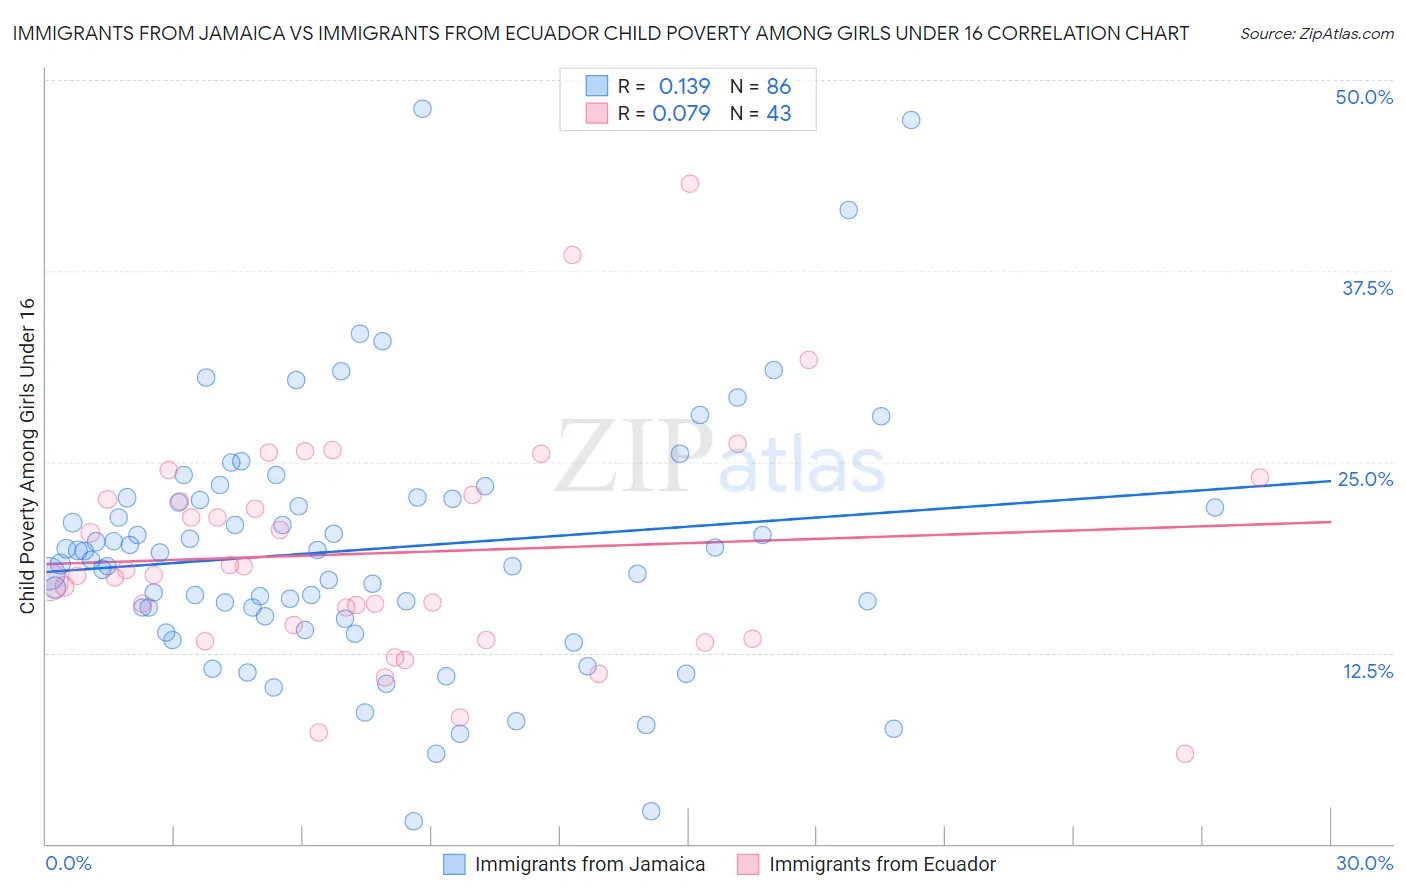 Immigrants from Jamaica vs Immigrants from Ecuador Child Poverty Among Girls Under 16